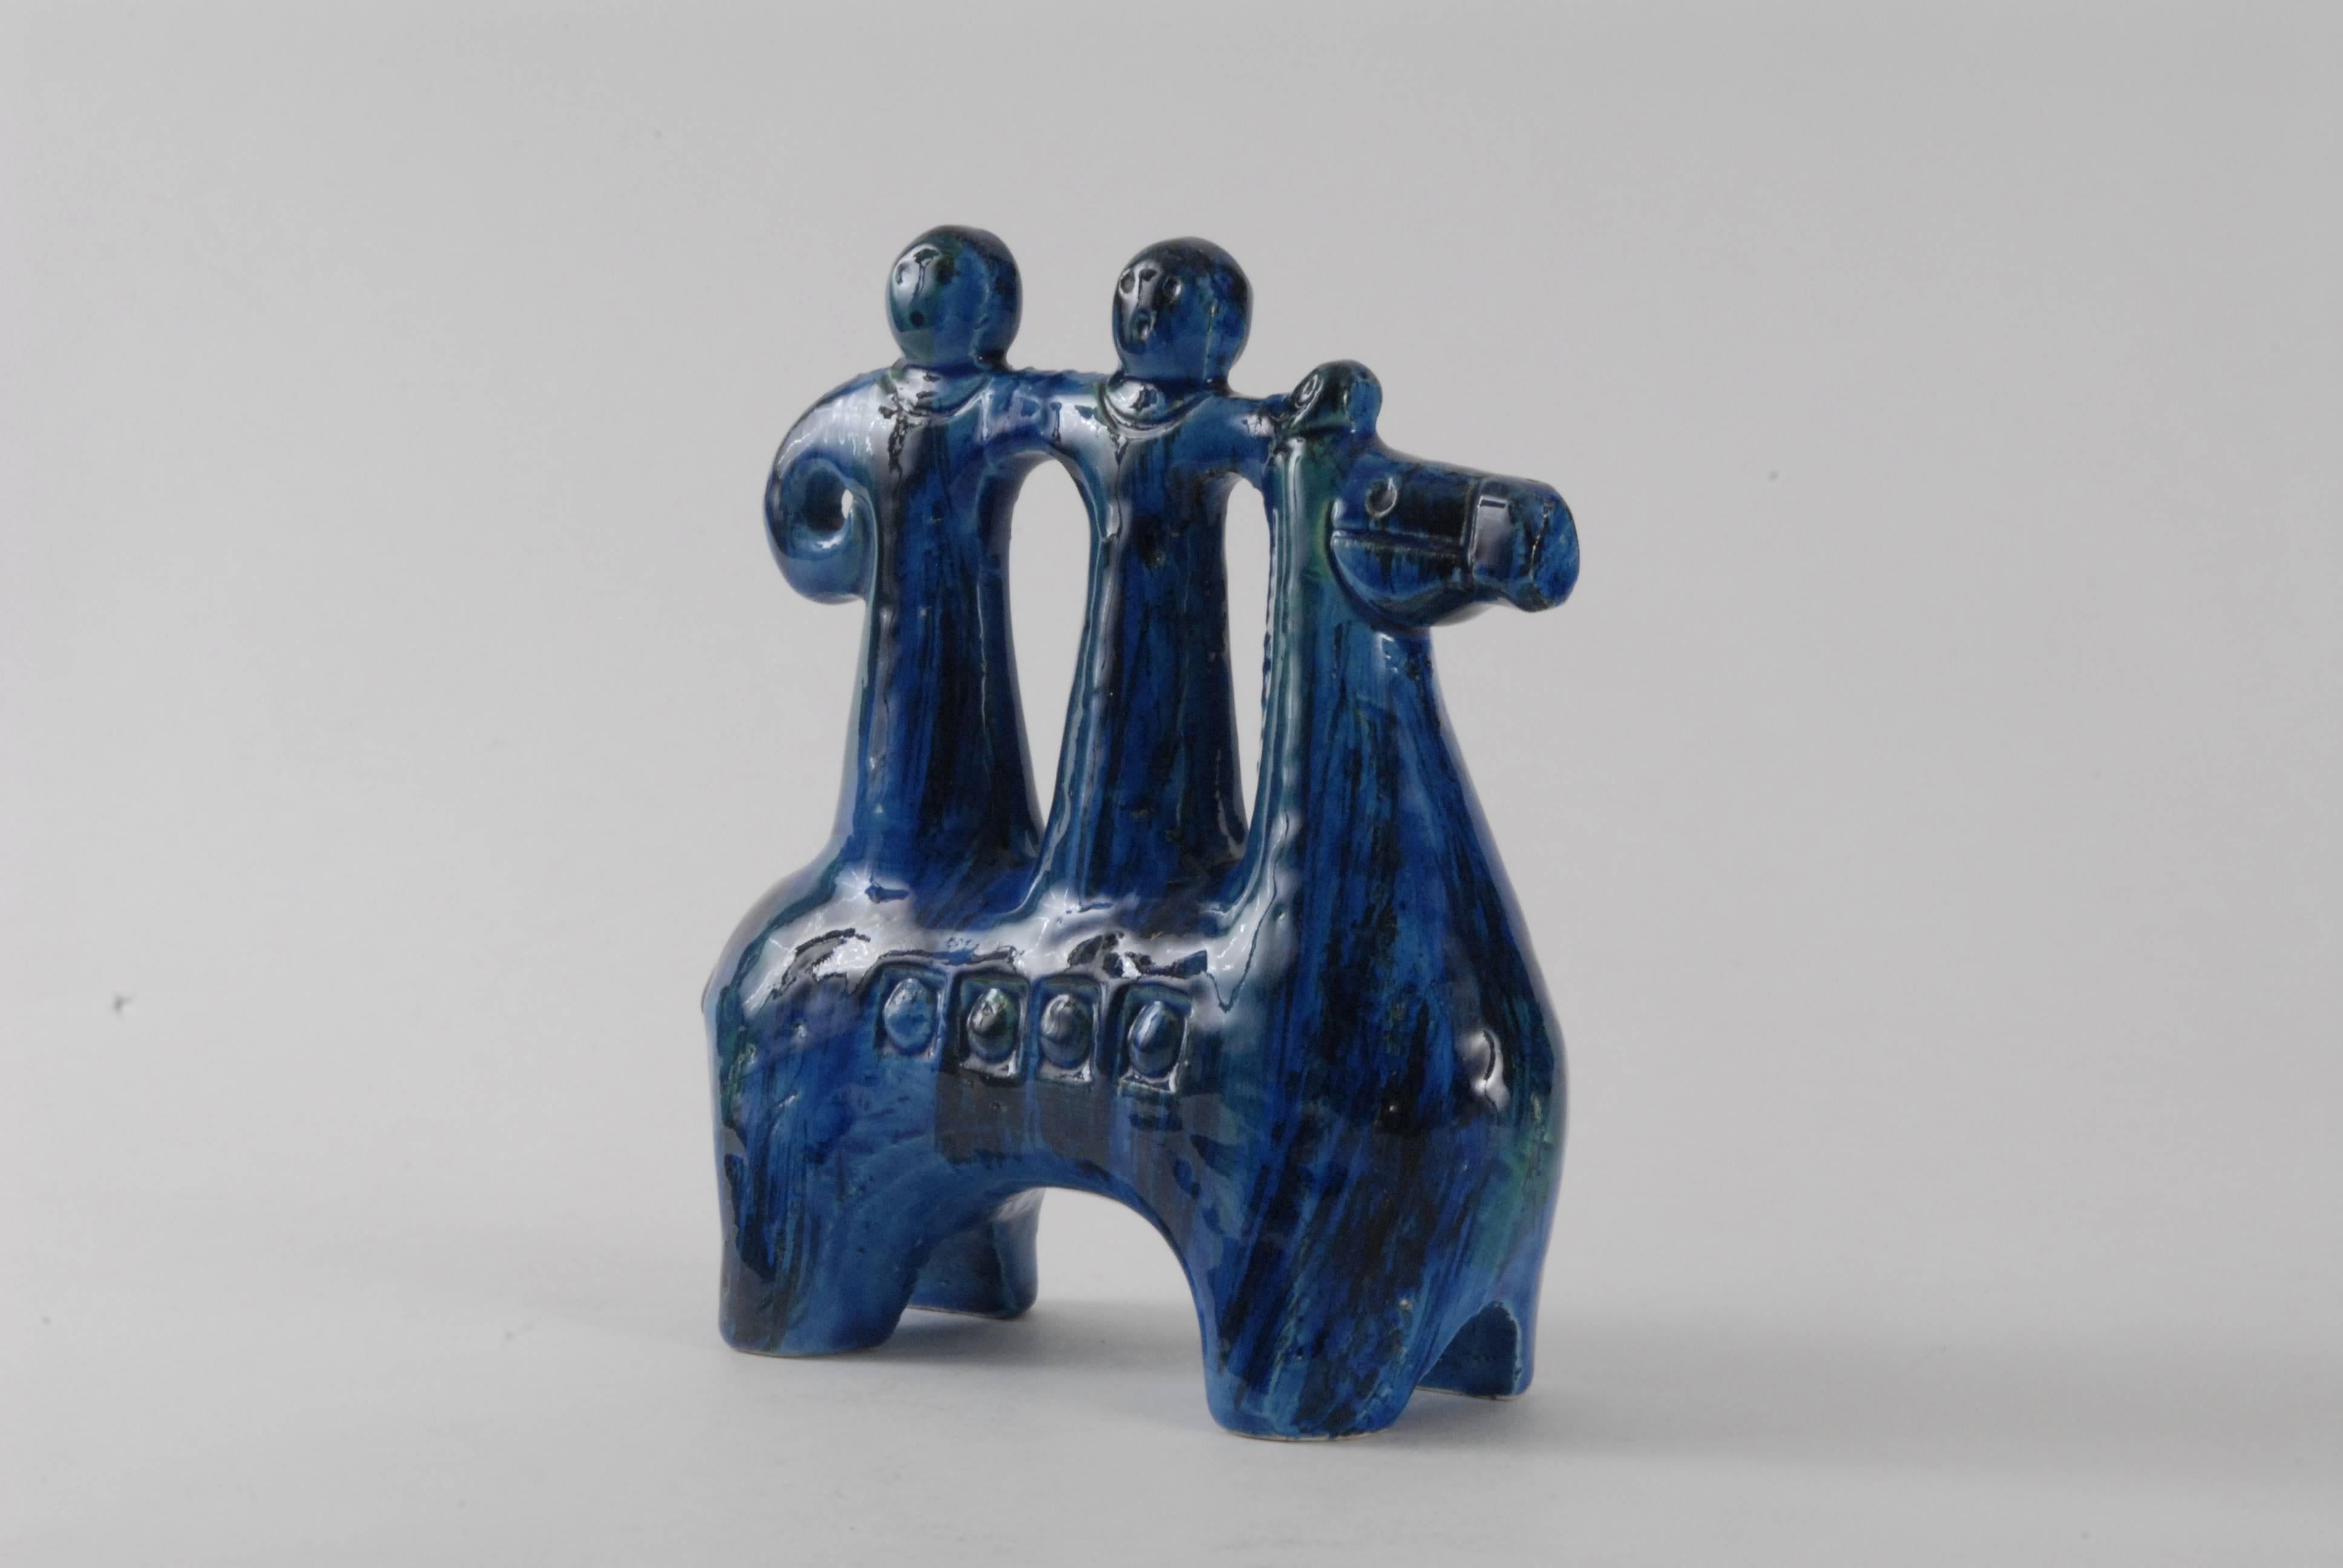 A lovely small Rimini Blu decorated horse with two riders by Aldo Londi for Bitossi, circa 1968.